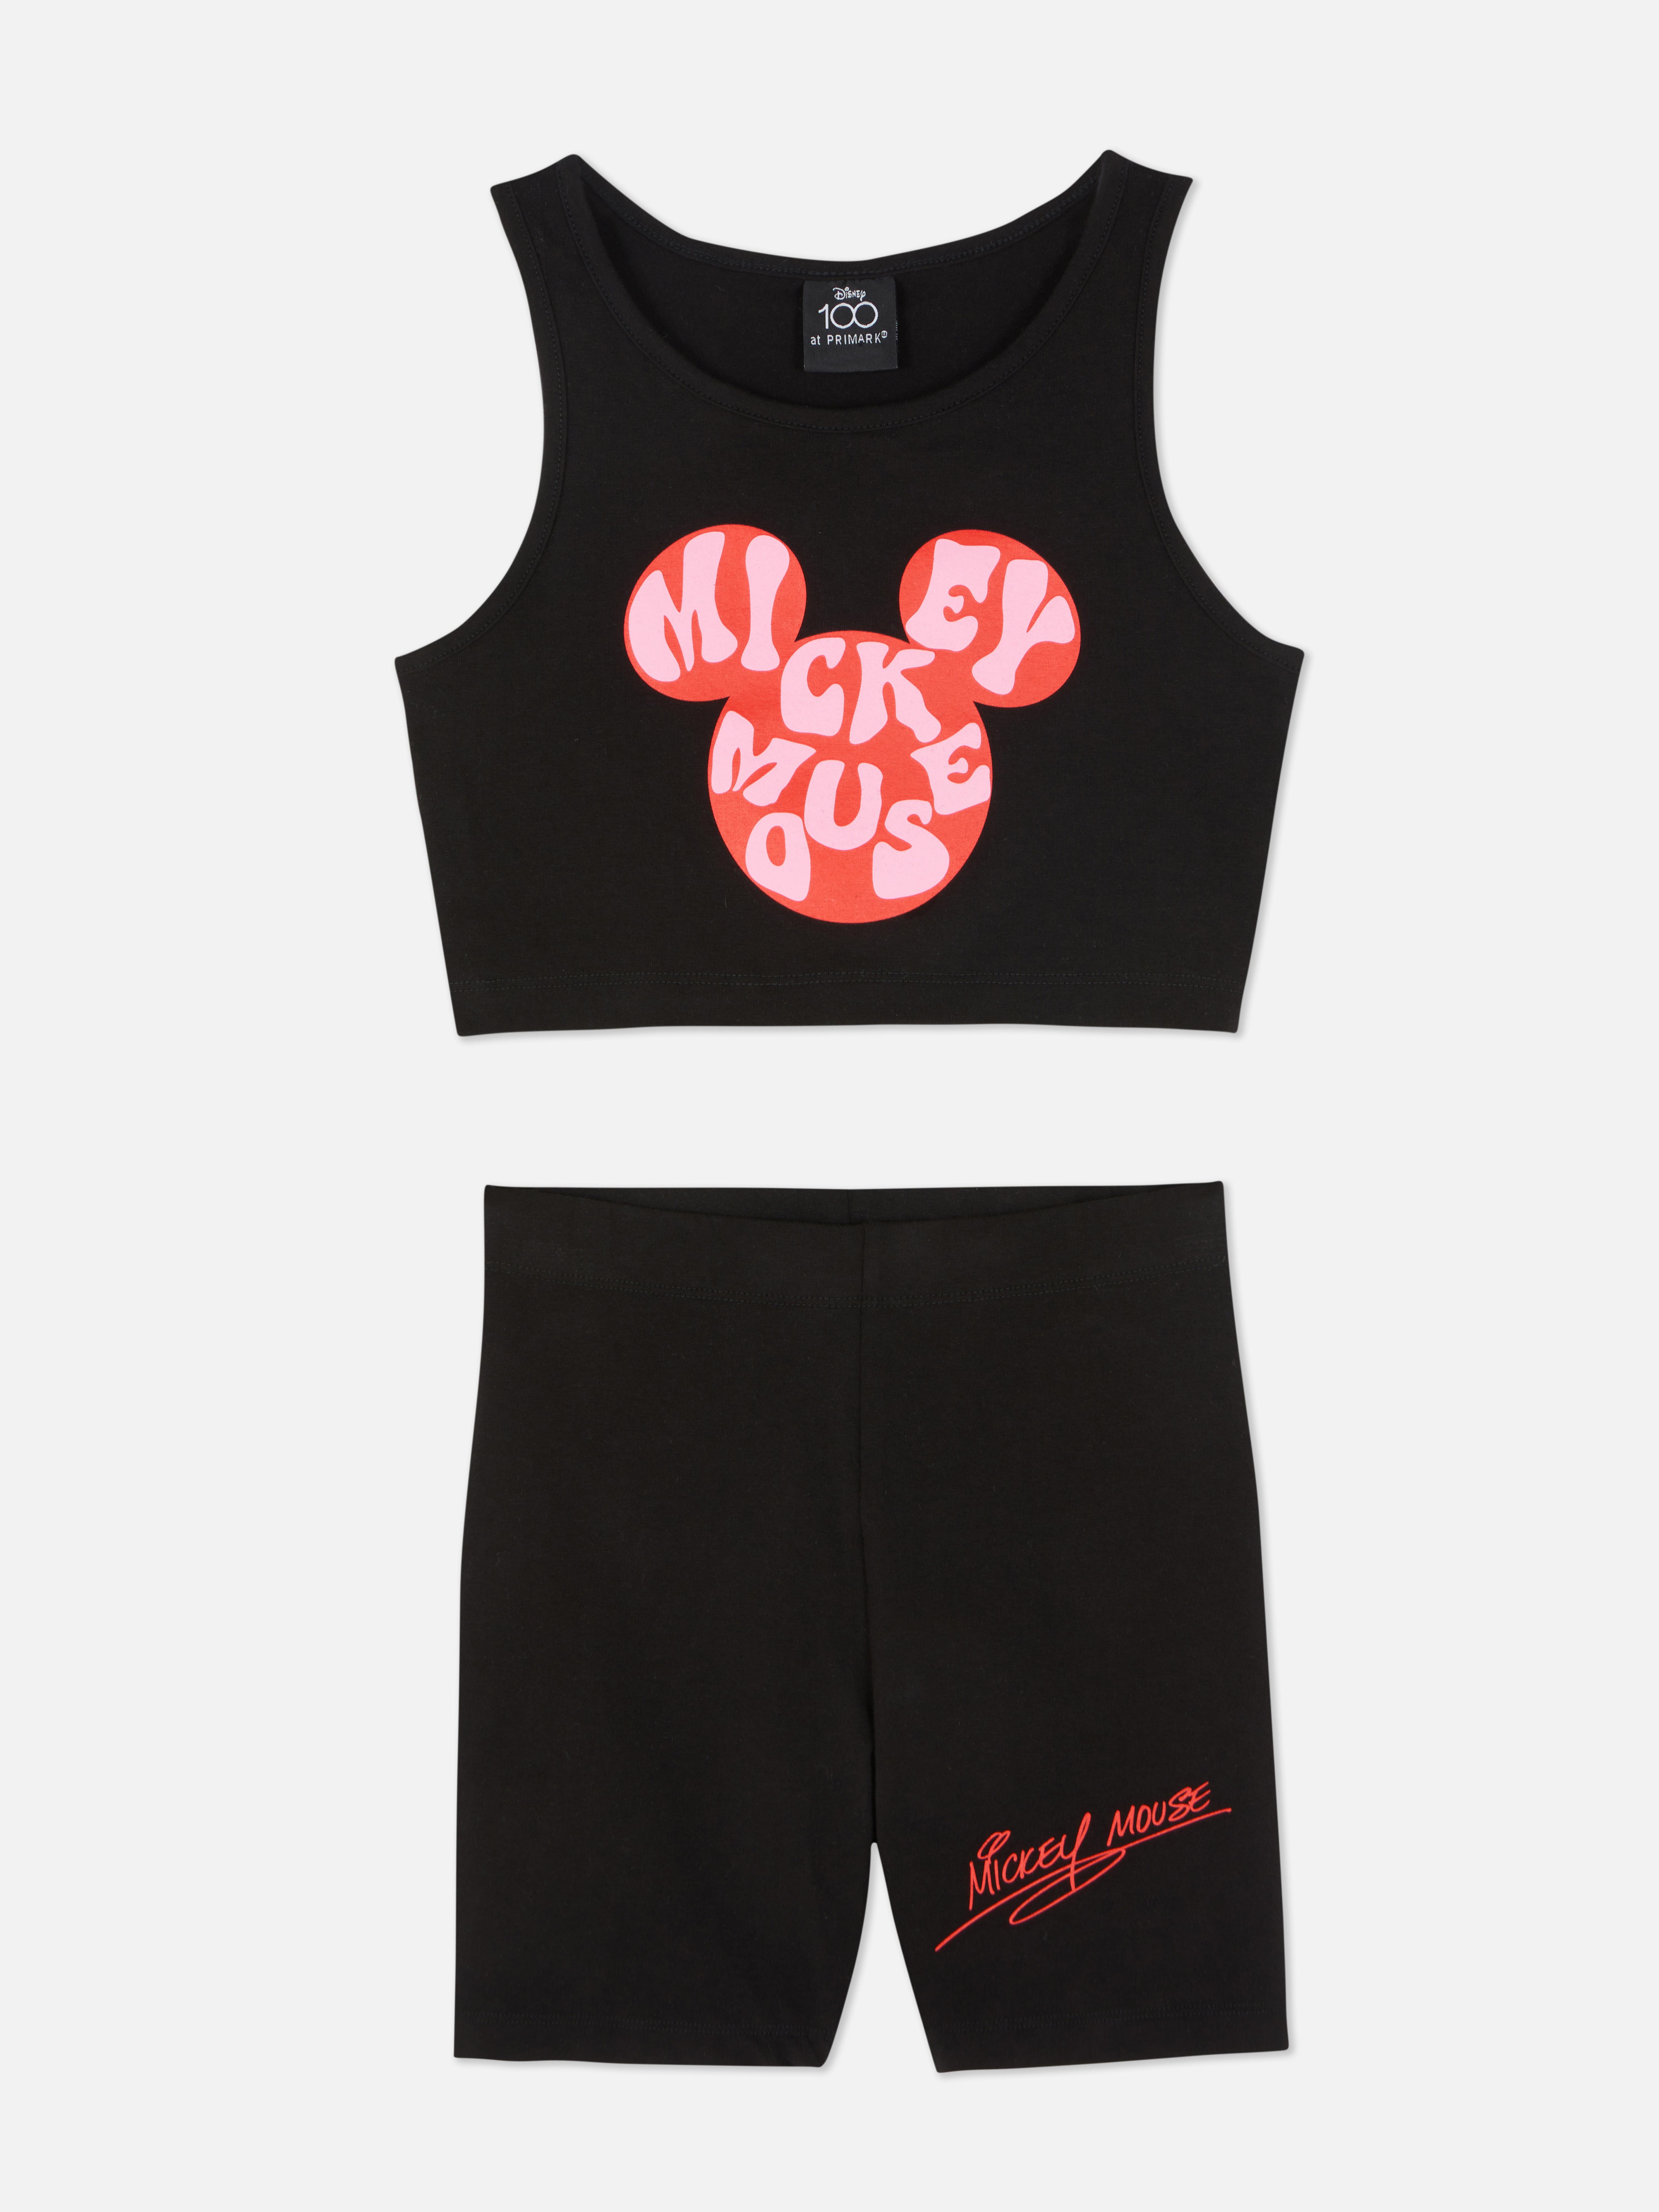 Disney’s Mickey Mouse Originals Top and Shorts Set